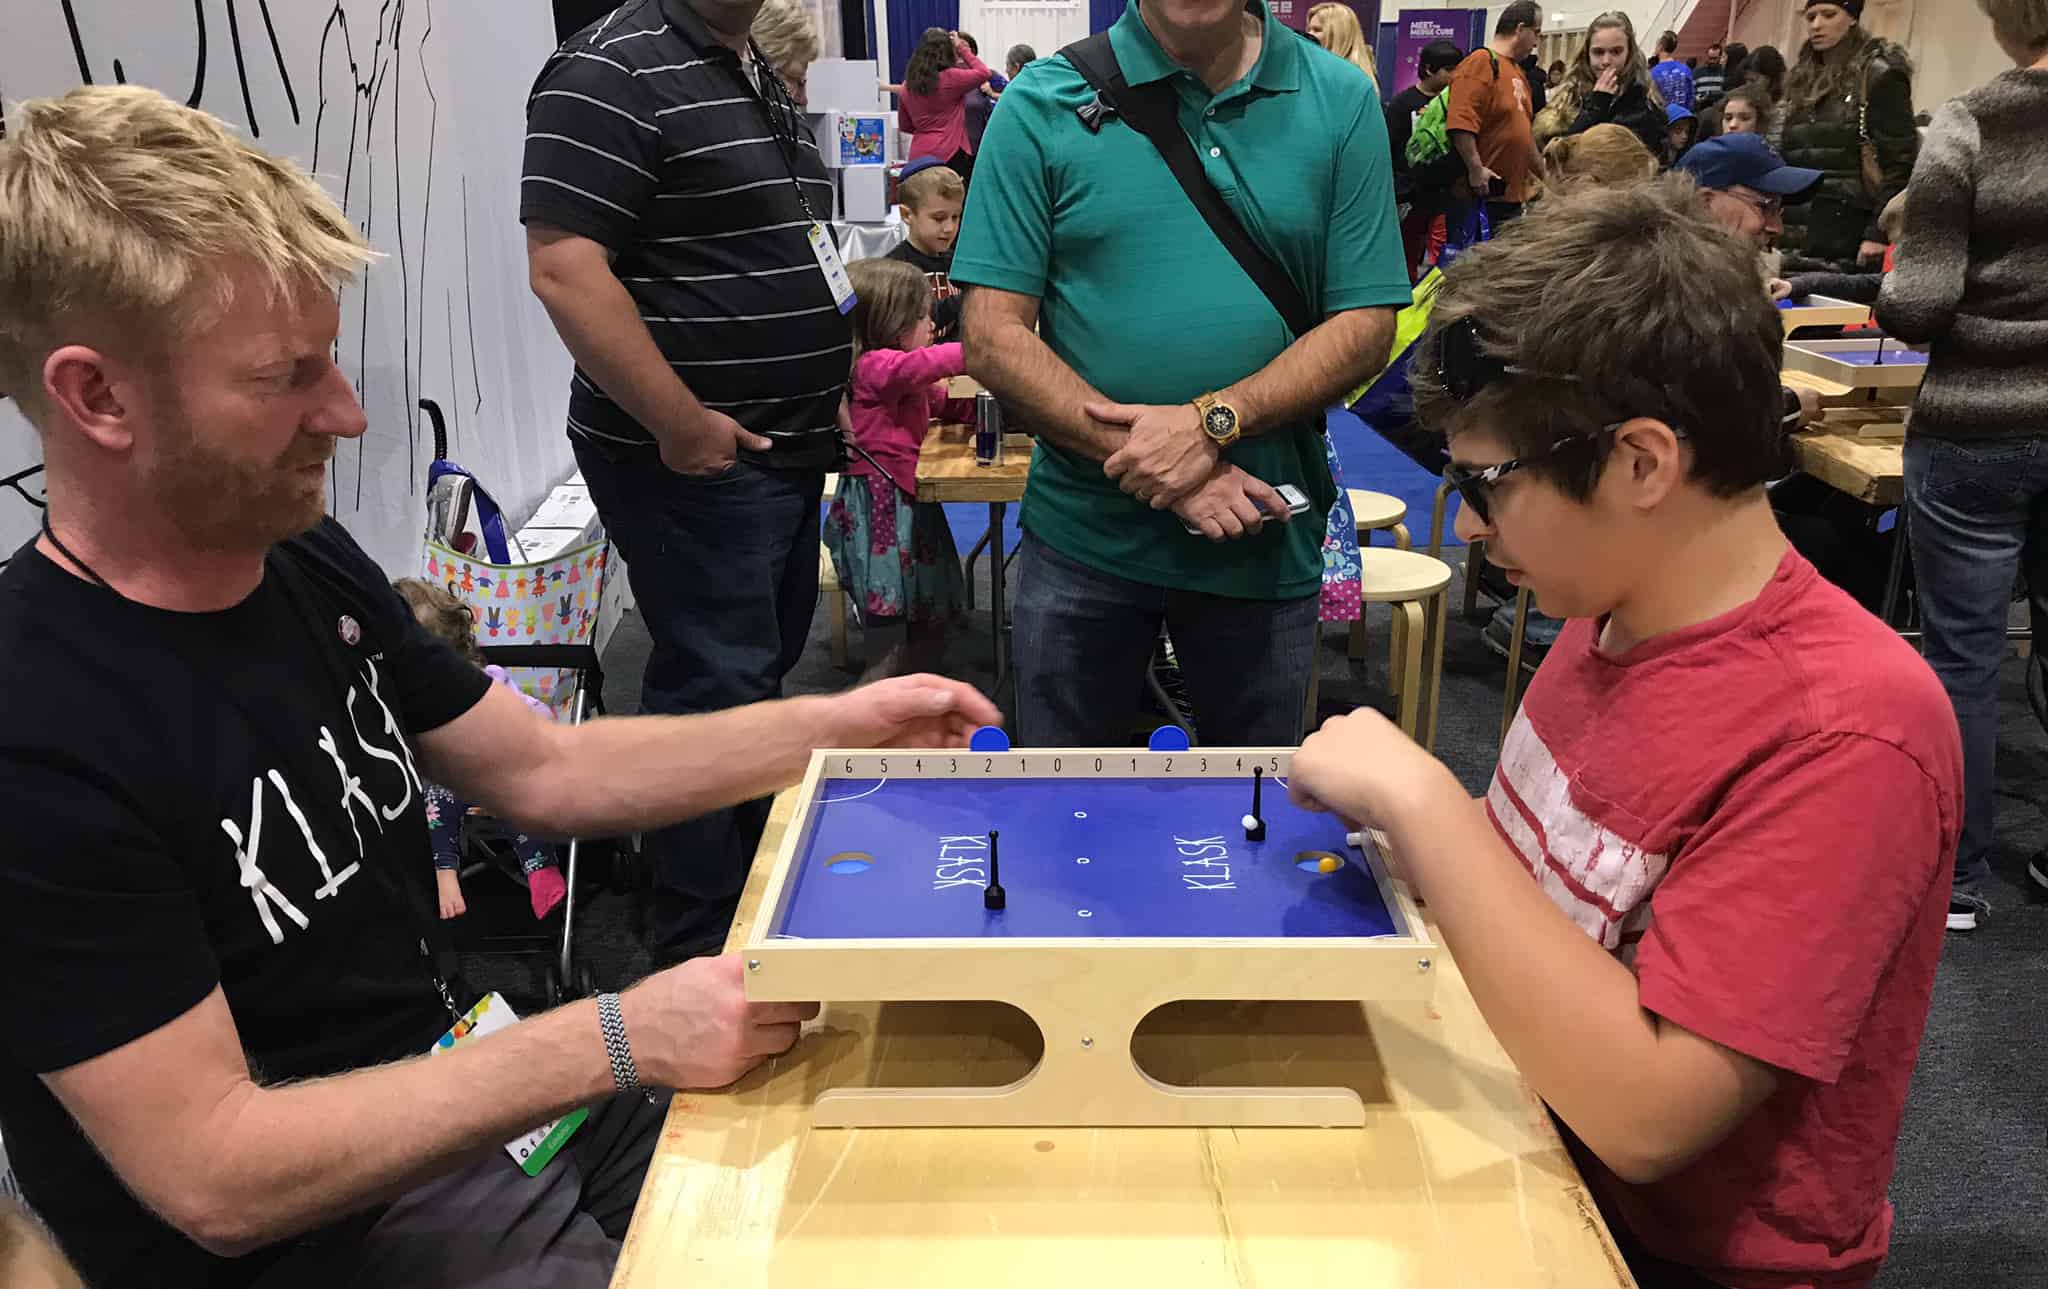 Playing the game of Klask at the Chicago Toy and Game Fair